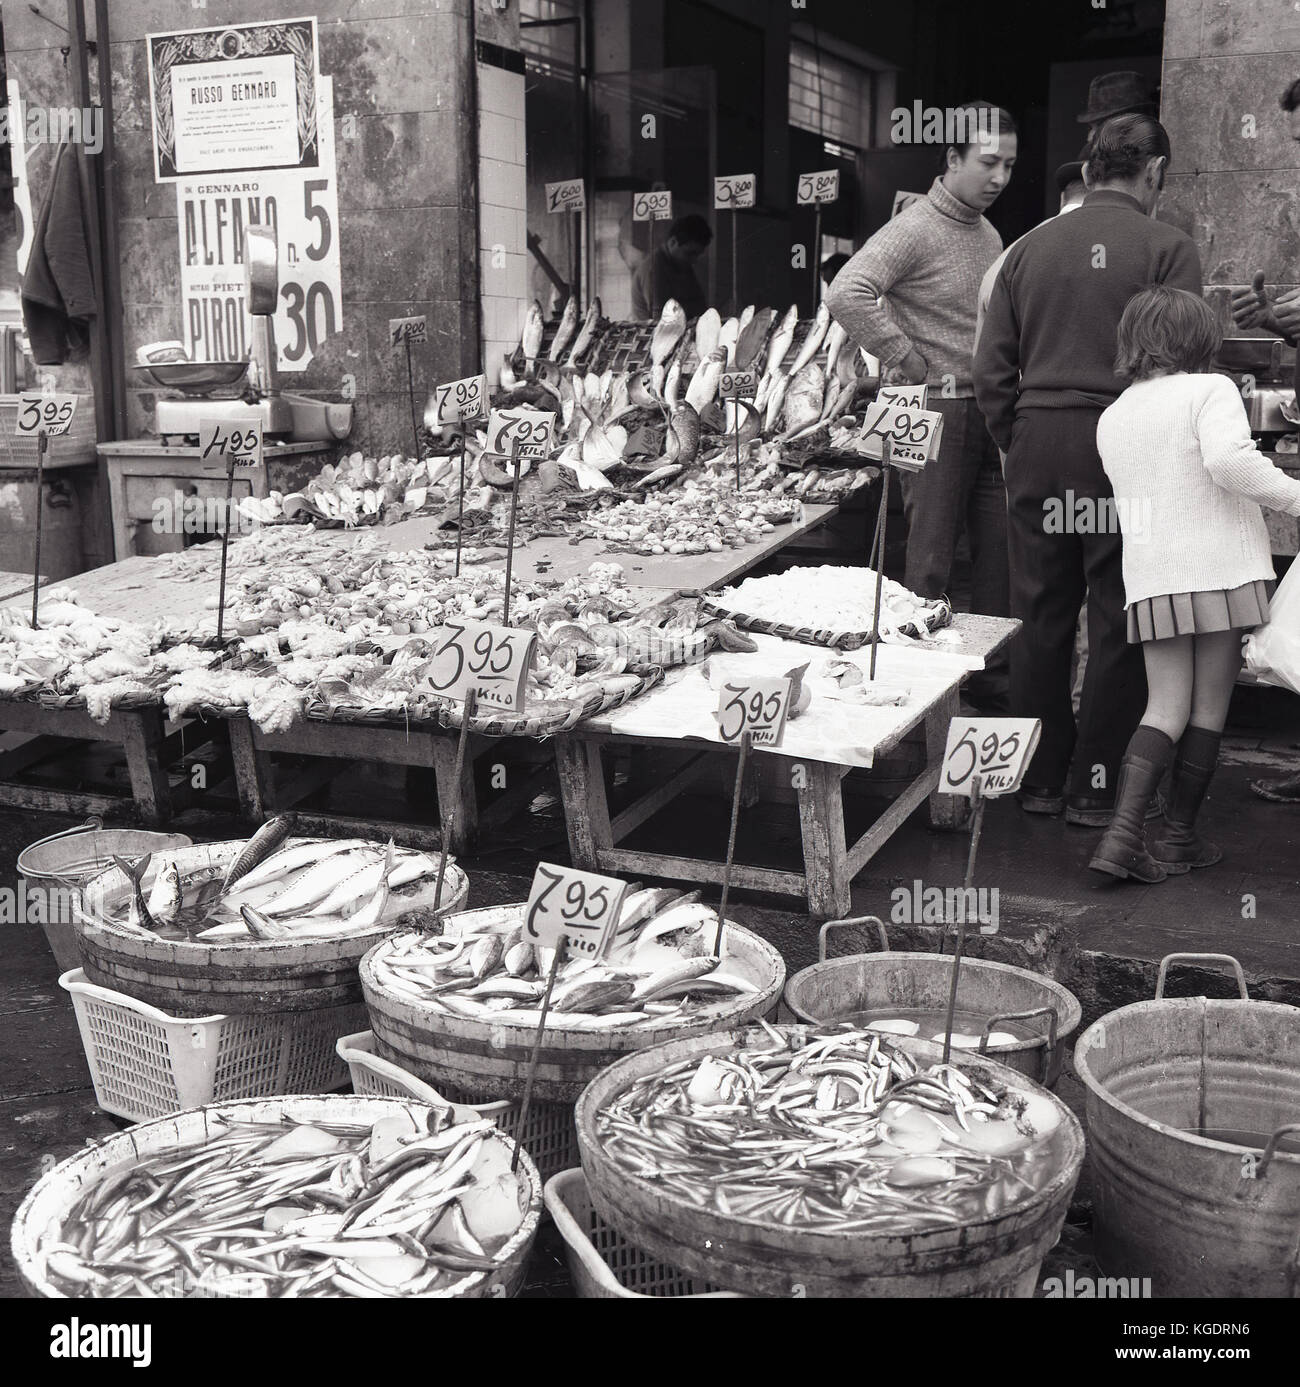 1950s, historical picture shows a street market stall selling many different types of fresh fish, Napoli, Italy, Stock Photo